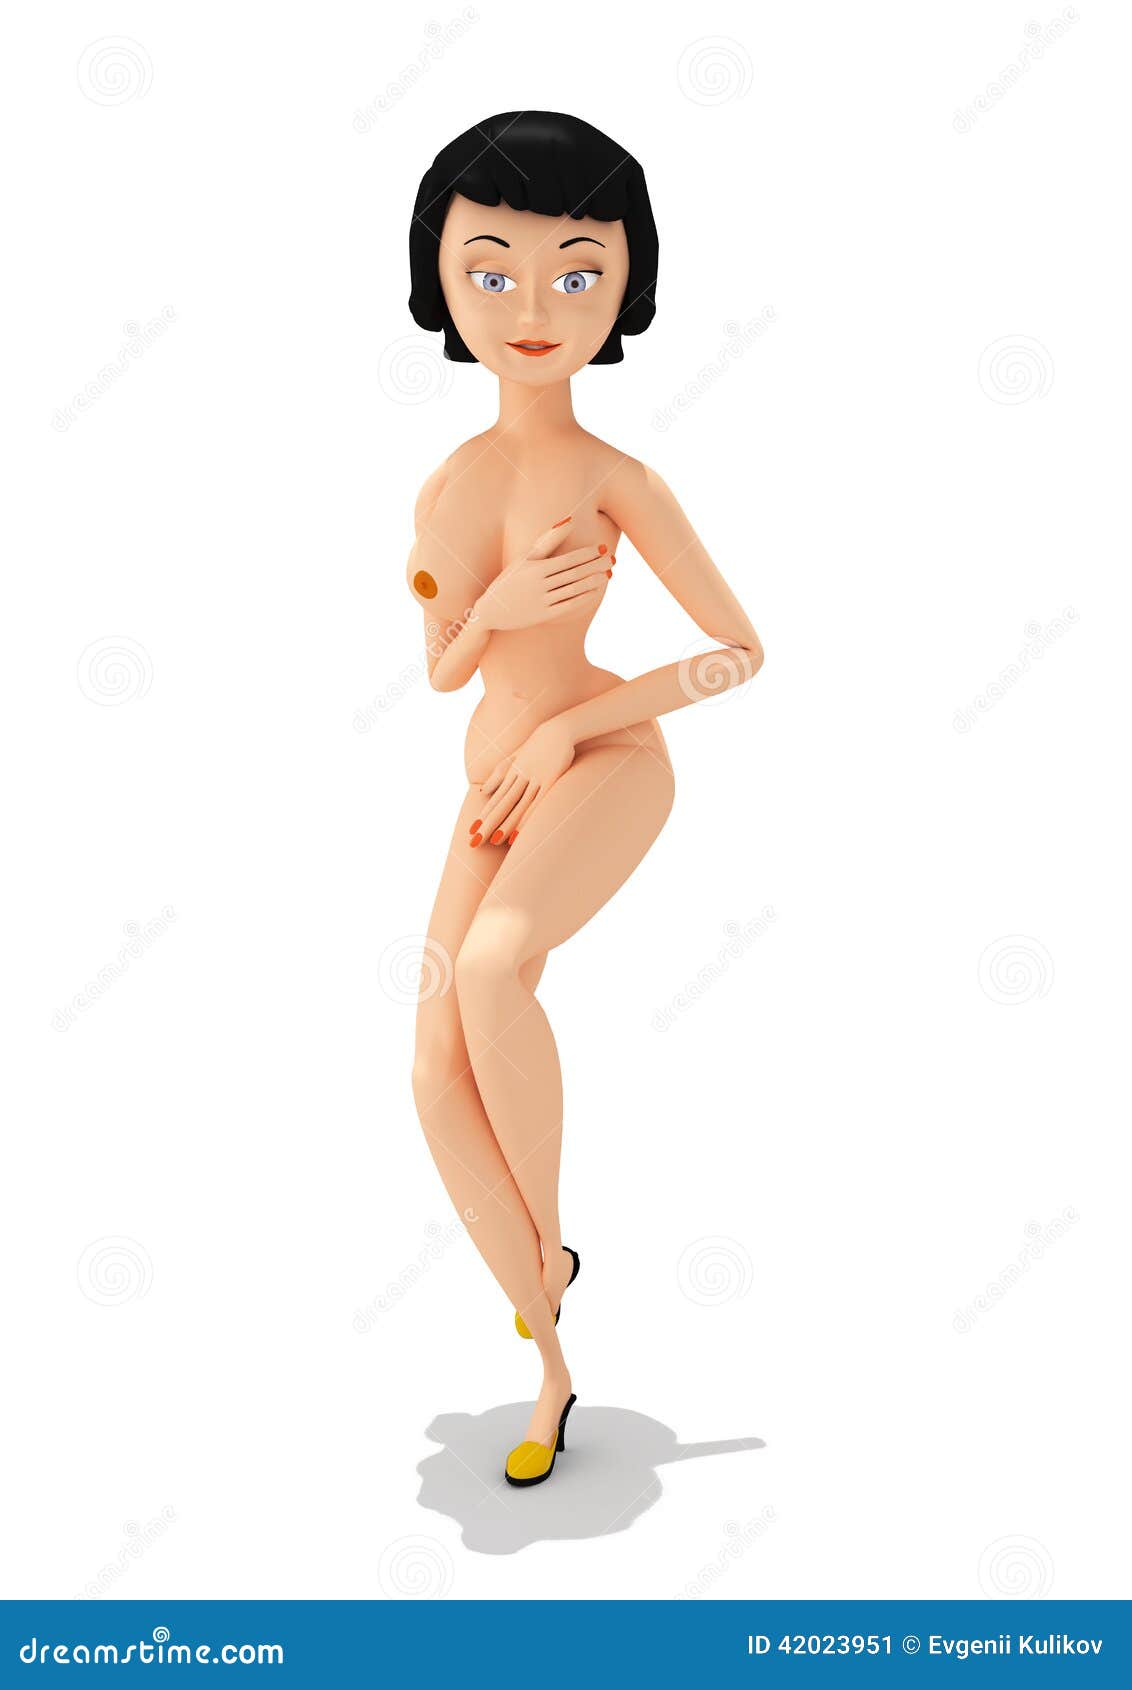 Girl with no clothes on